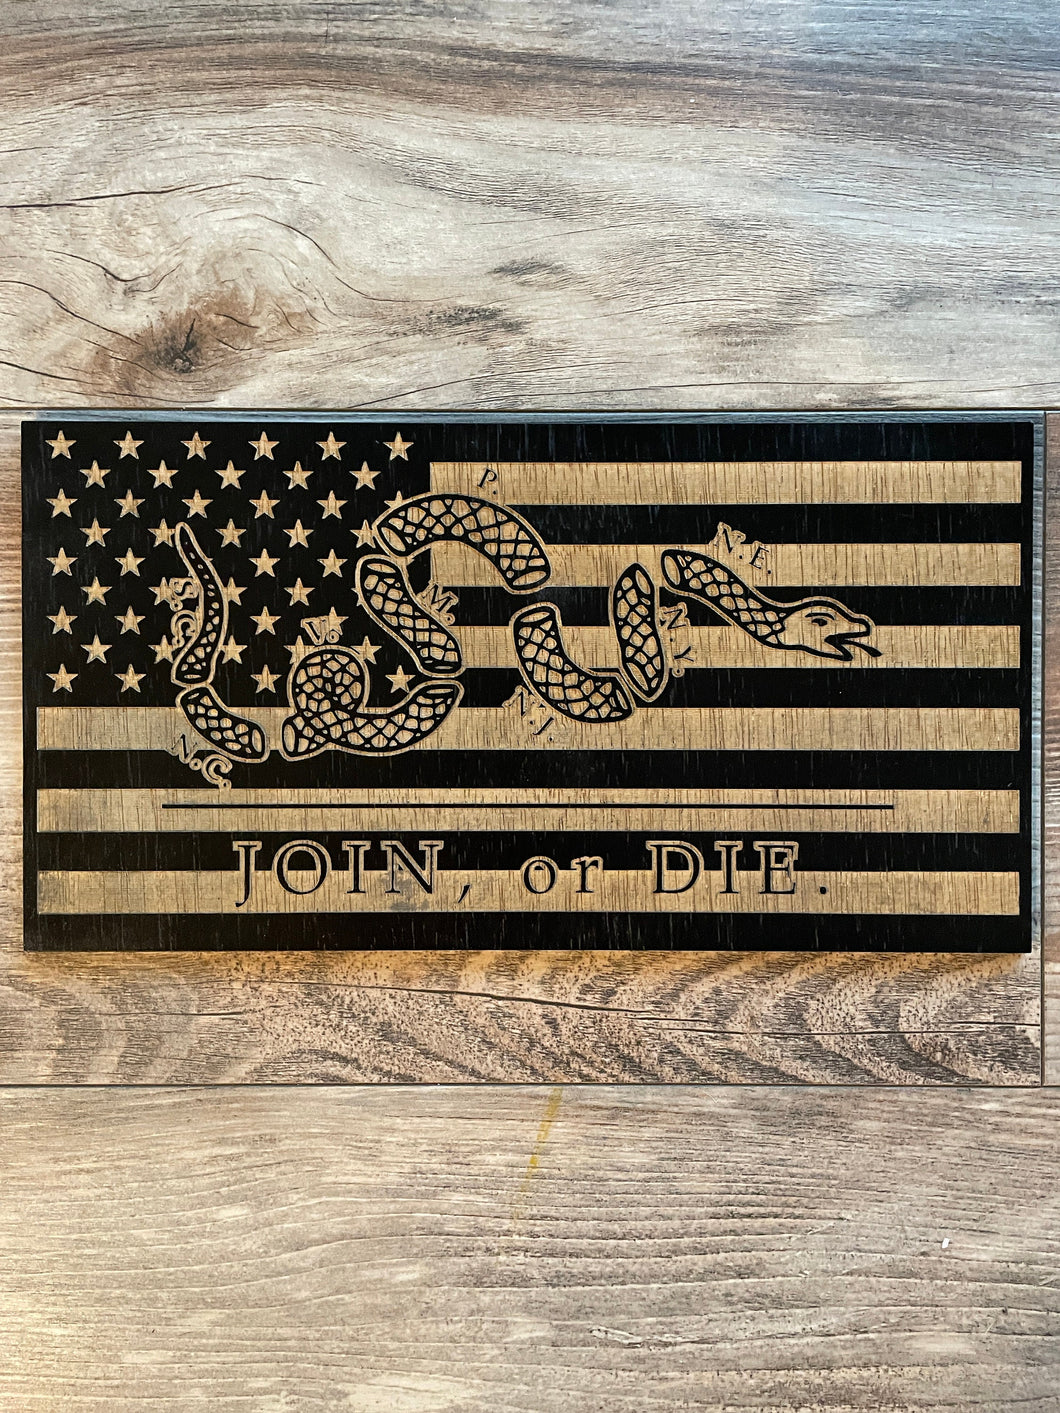 Join or Die Wood Flag, Dont Tread on Me, Join or Die, Wood Flag, Patriot, American Flag, Wood Decor, Trump, MAGA